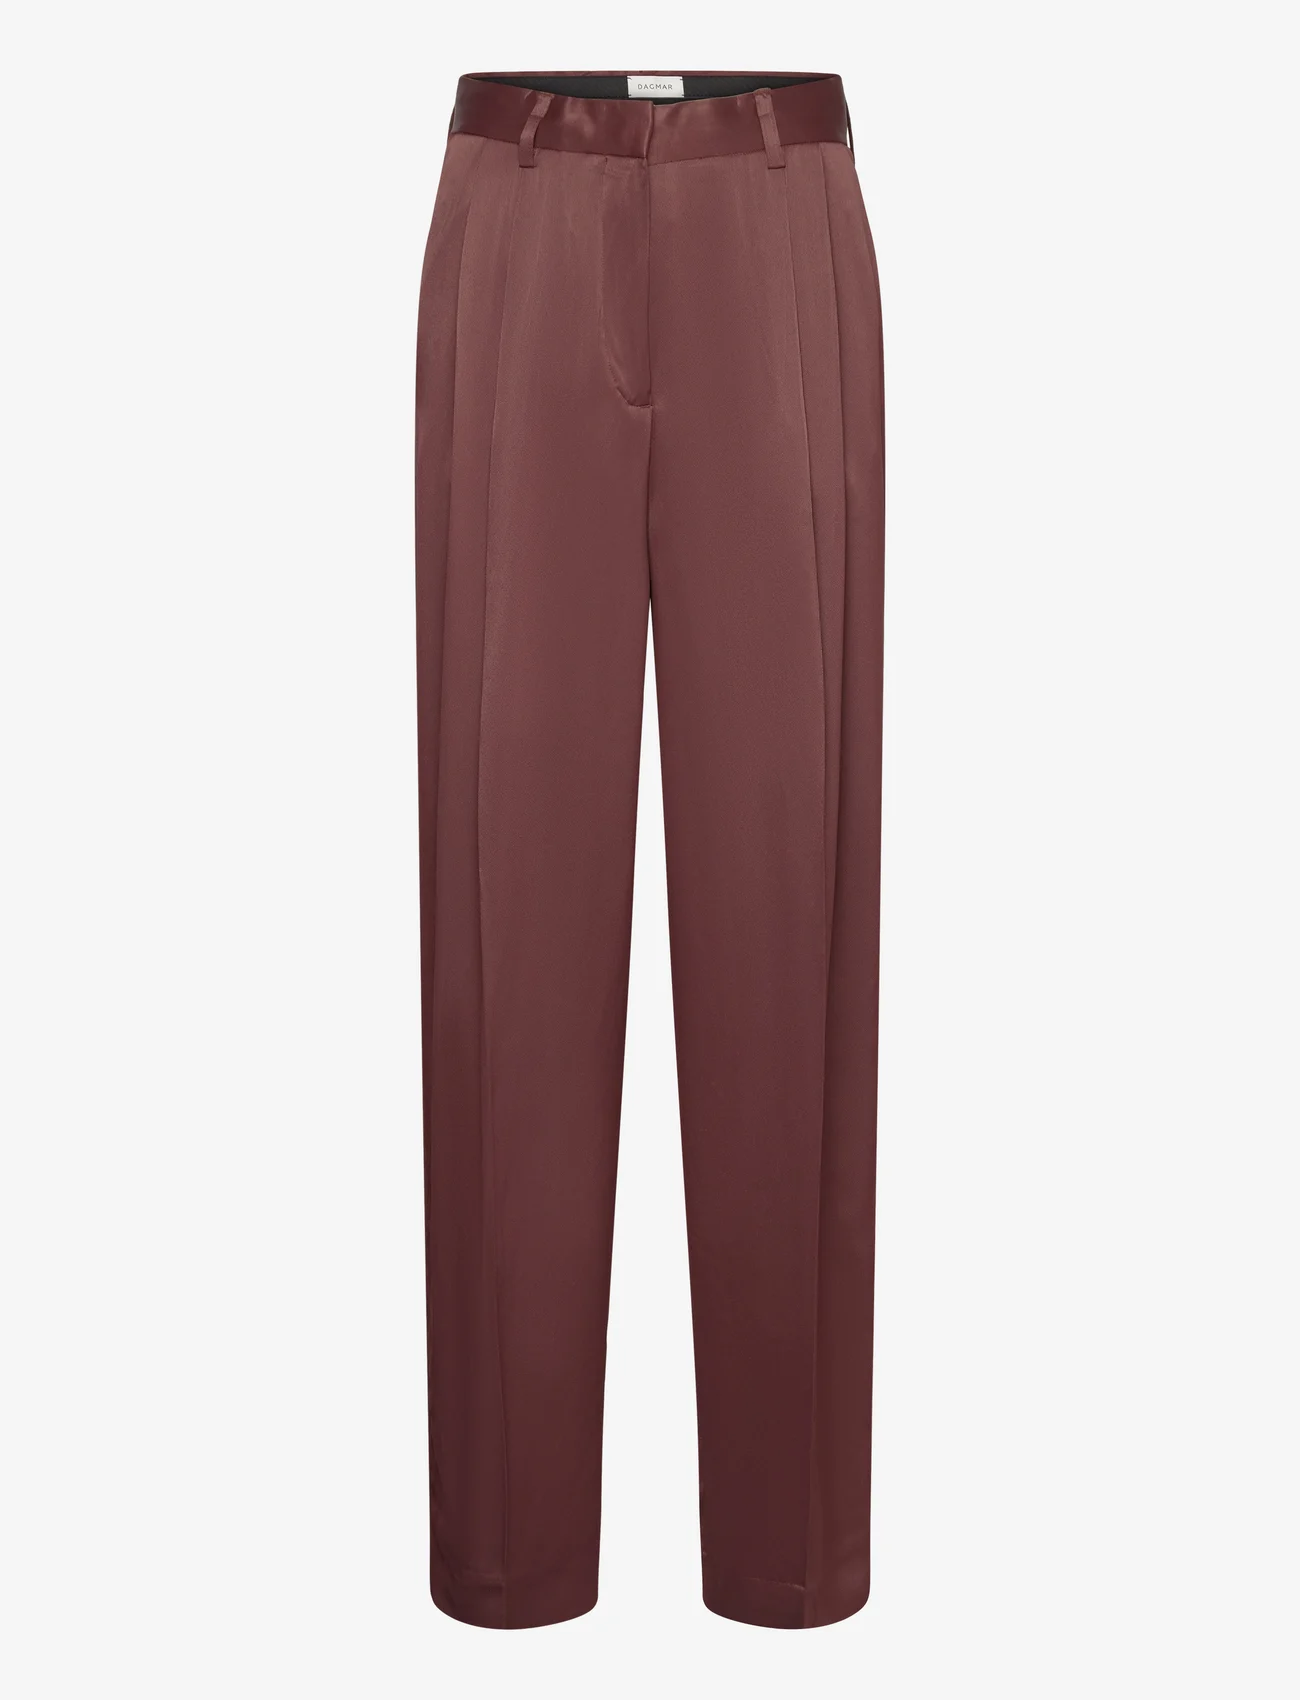 House Of Dagmar - SHINY WIDE SUIT PANT - tailored trousers - chocolate brown - 0